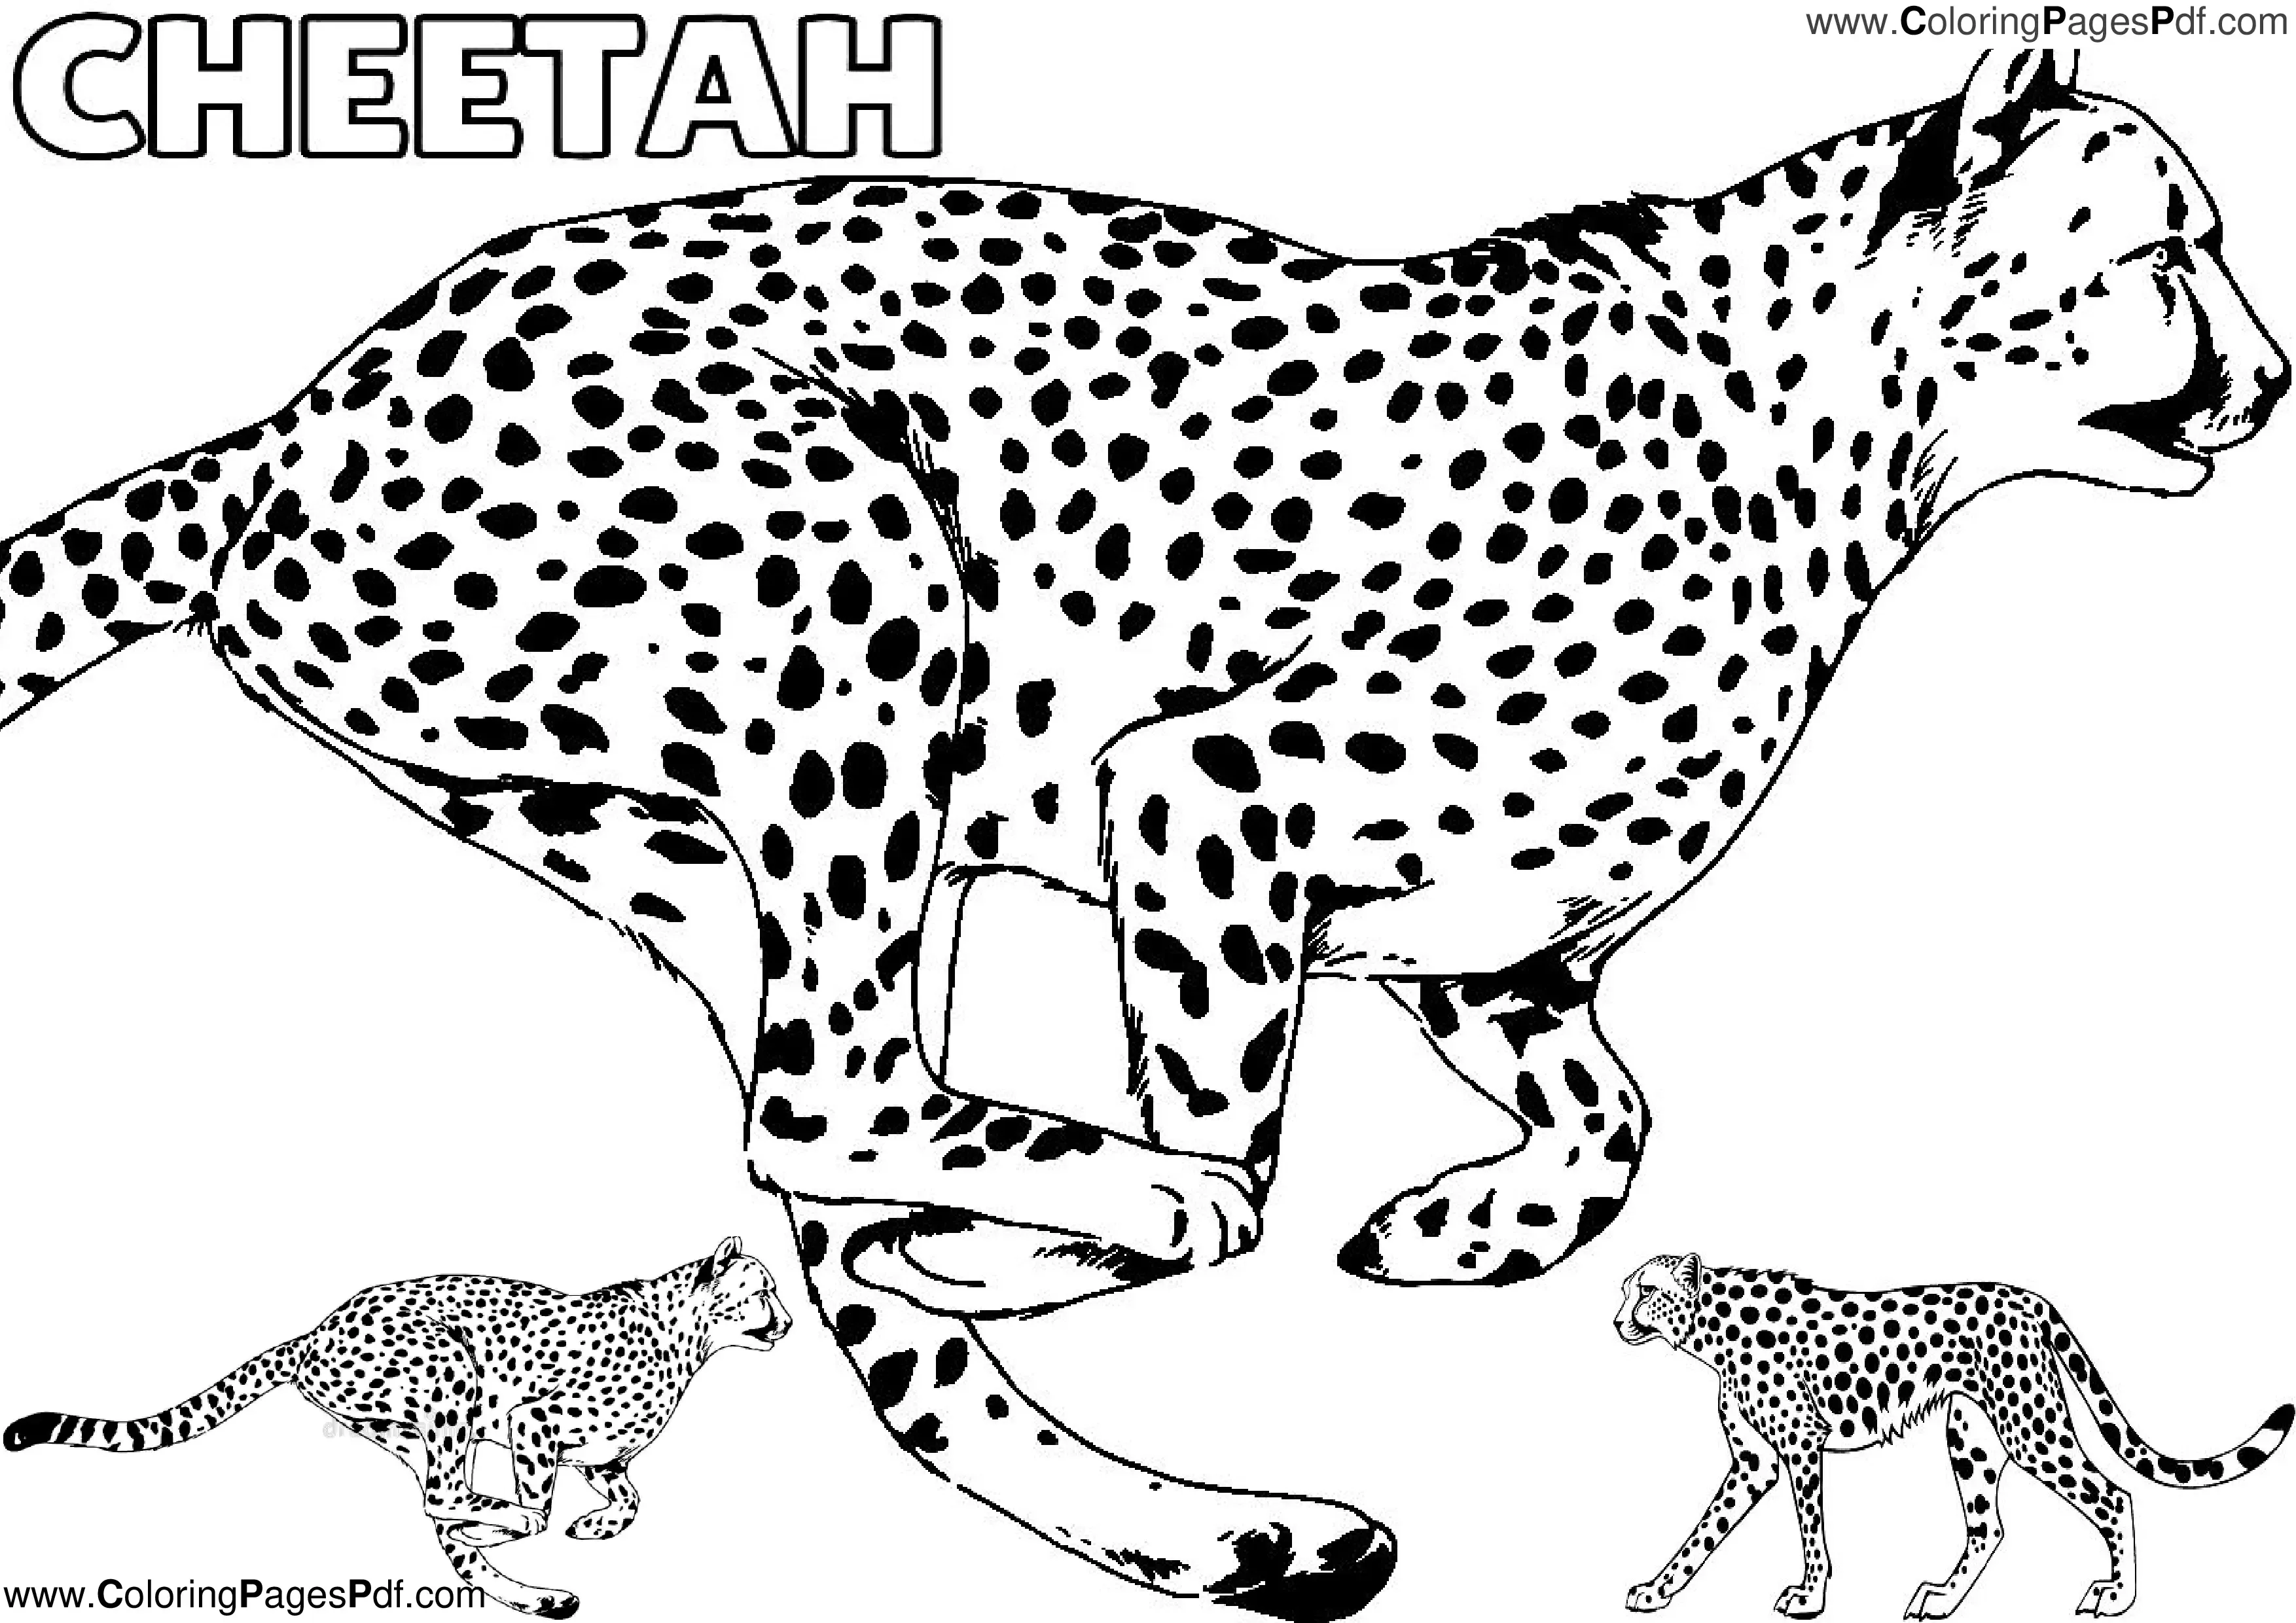 Best cheetah coloring pages